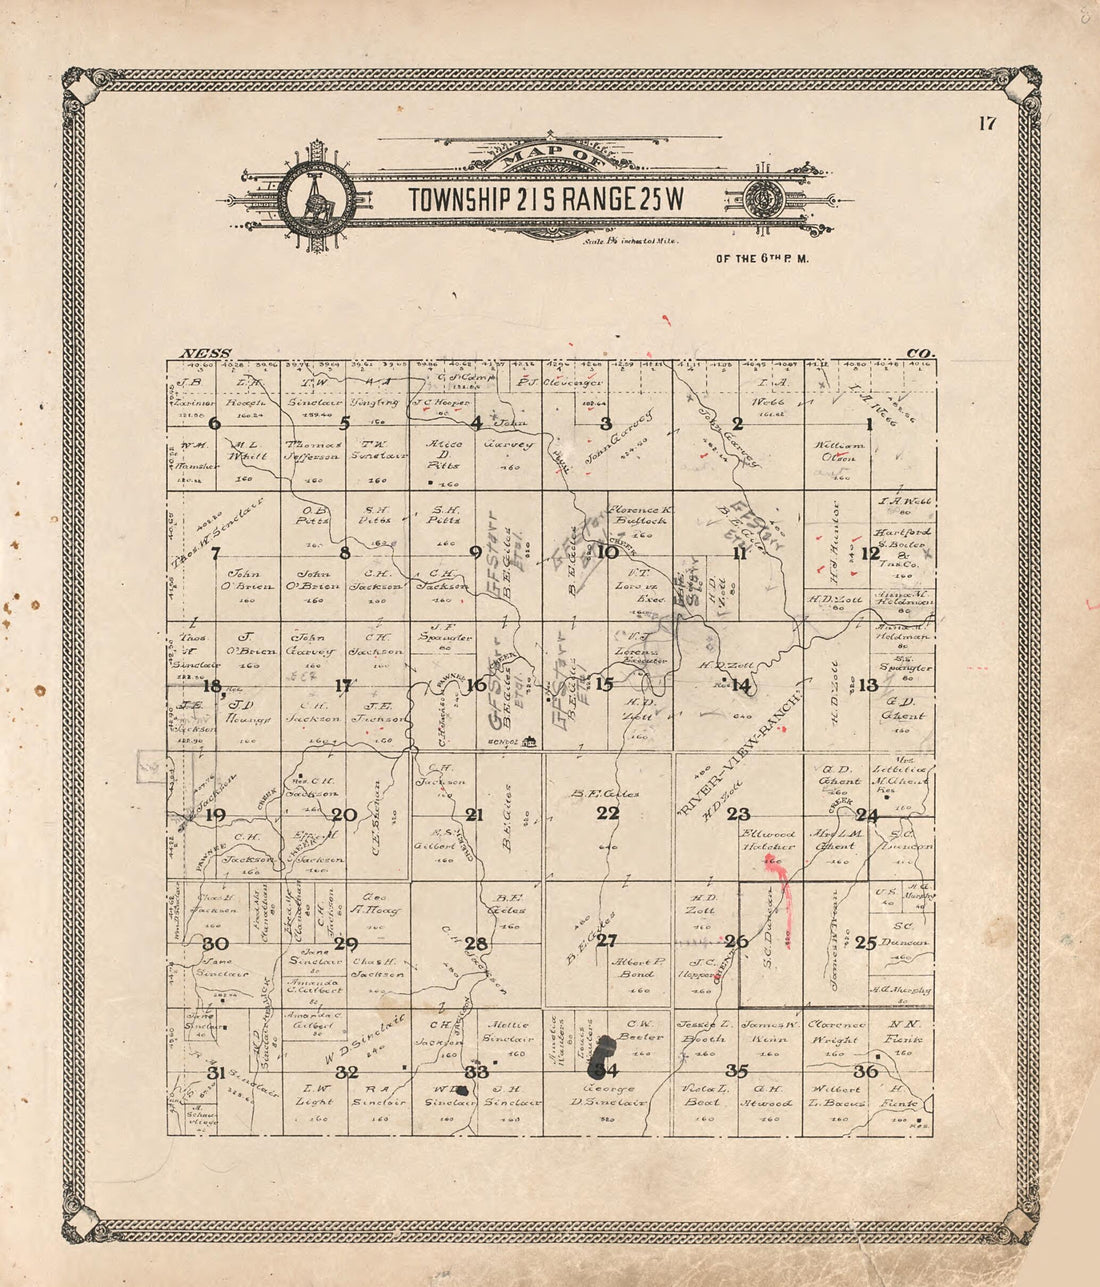 This old map of Map of Township 21 S Range 25 W from Standard Atlas of Hodgeman County, Kansas from 1907 was created by  Geo. A. Ogle &amp; Co in 1907